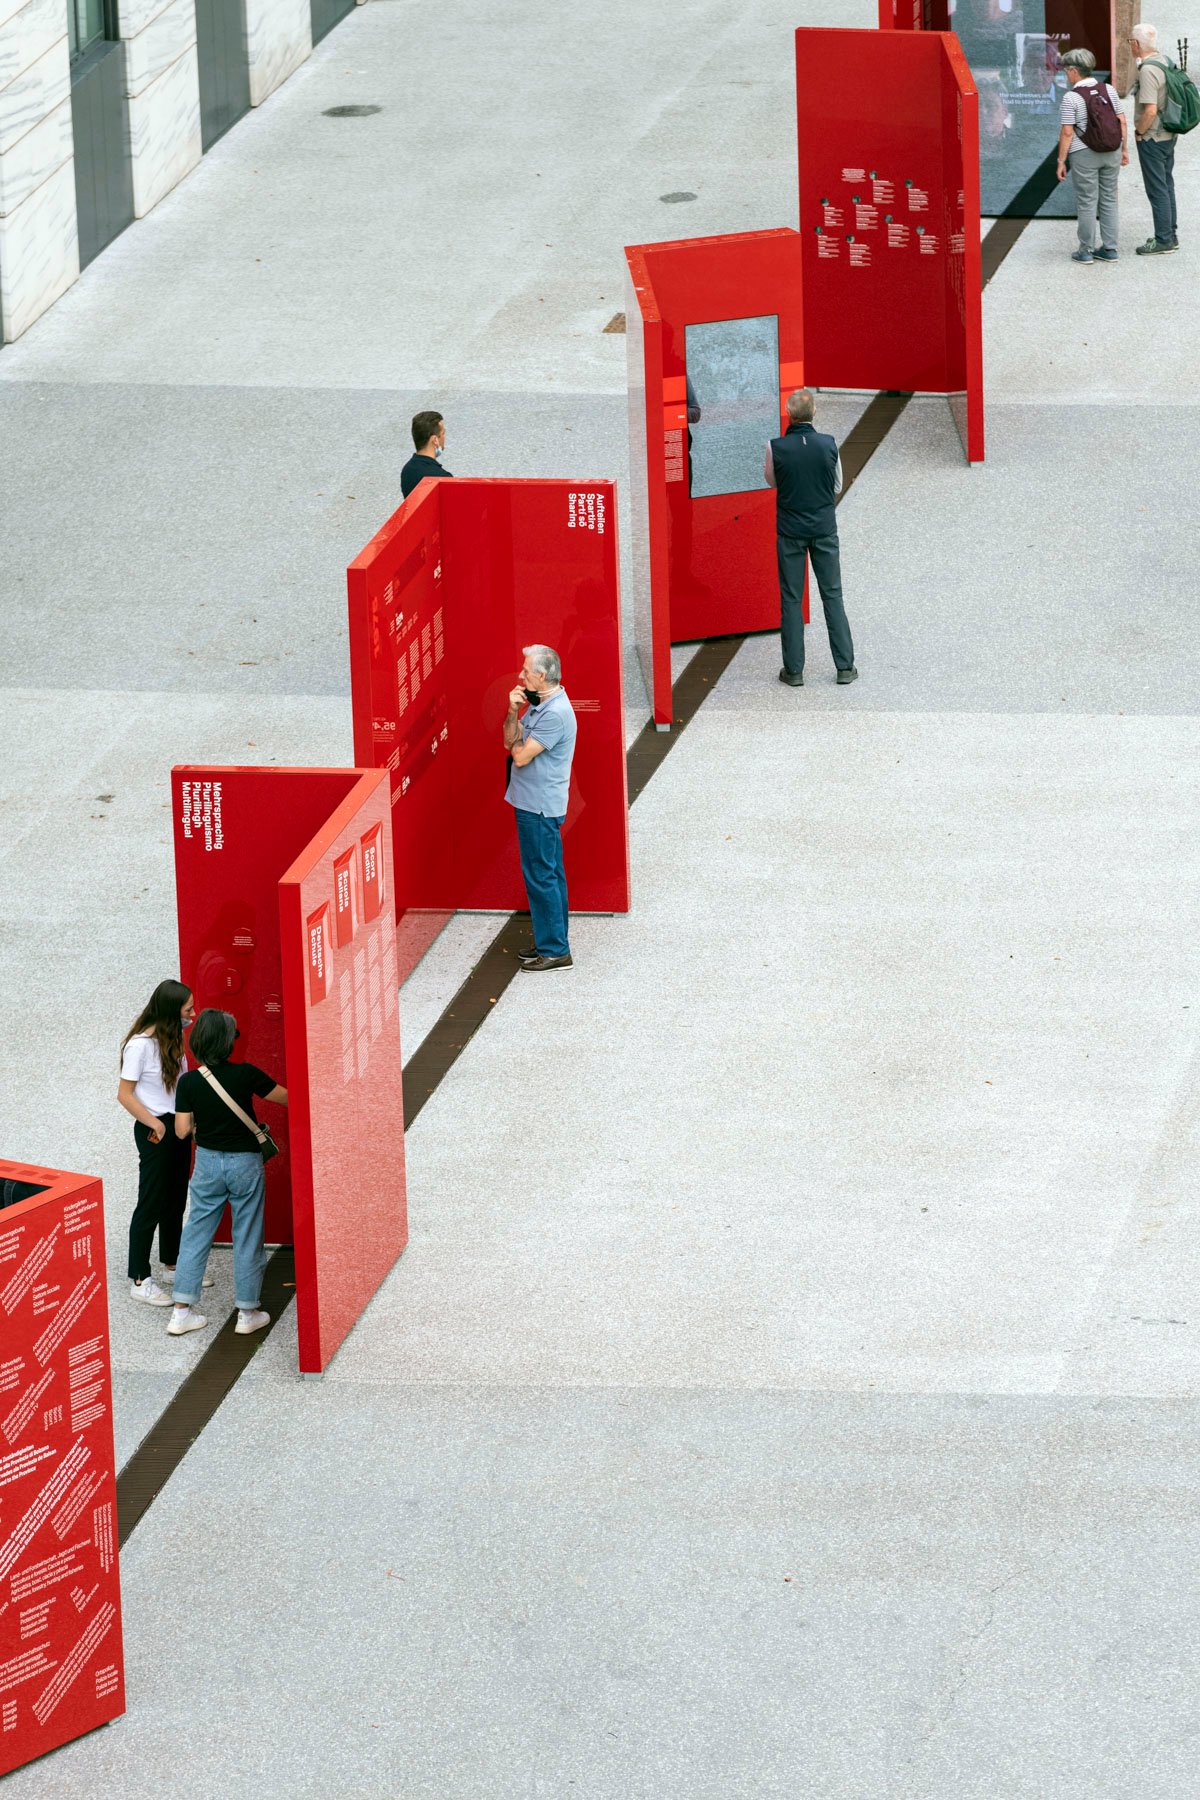 Visitors of the permanent exhibition on the South Tyrolean autonomy located in Silvius Magnago Square in Bolzano.